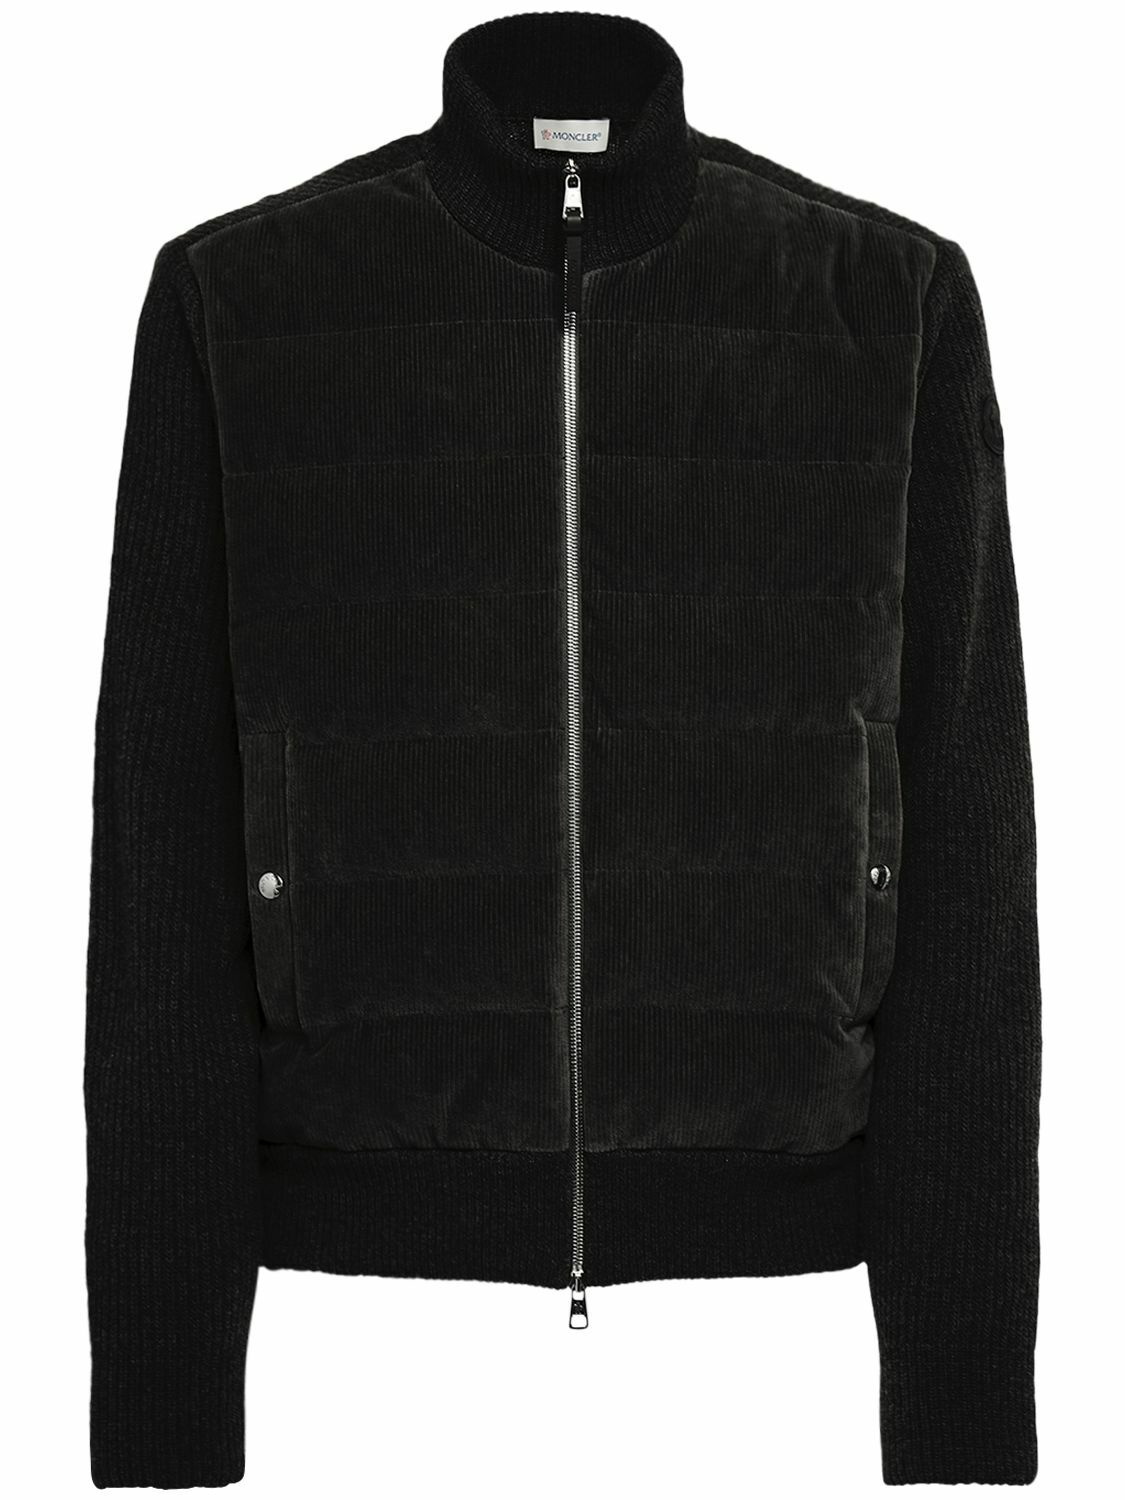 Graphic Padded Wool Cardigan by Moncler